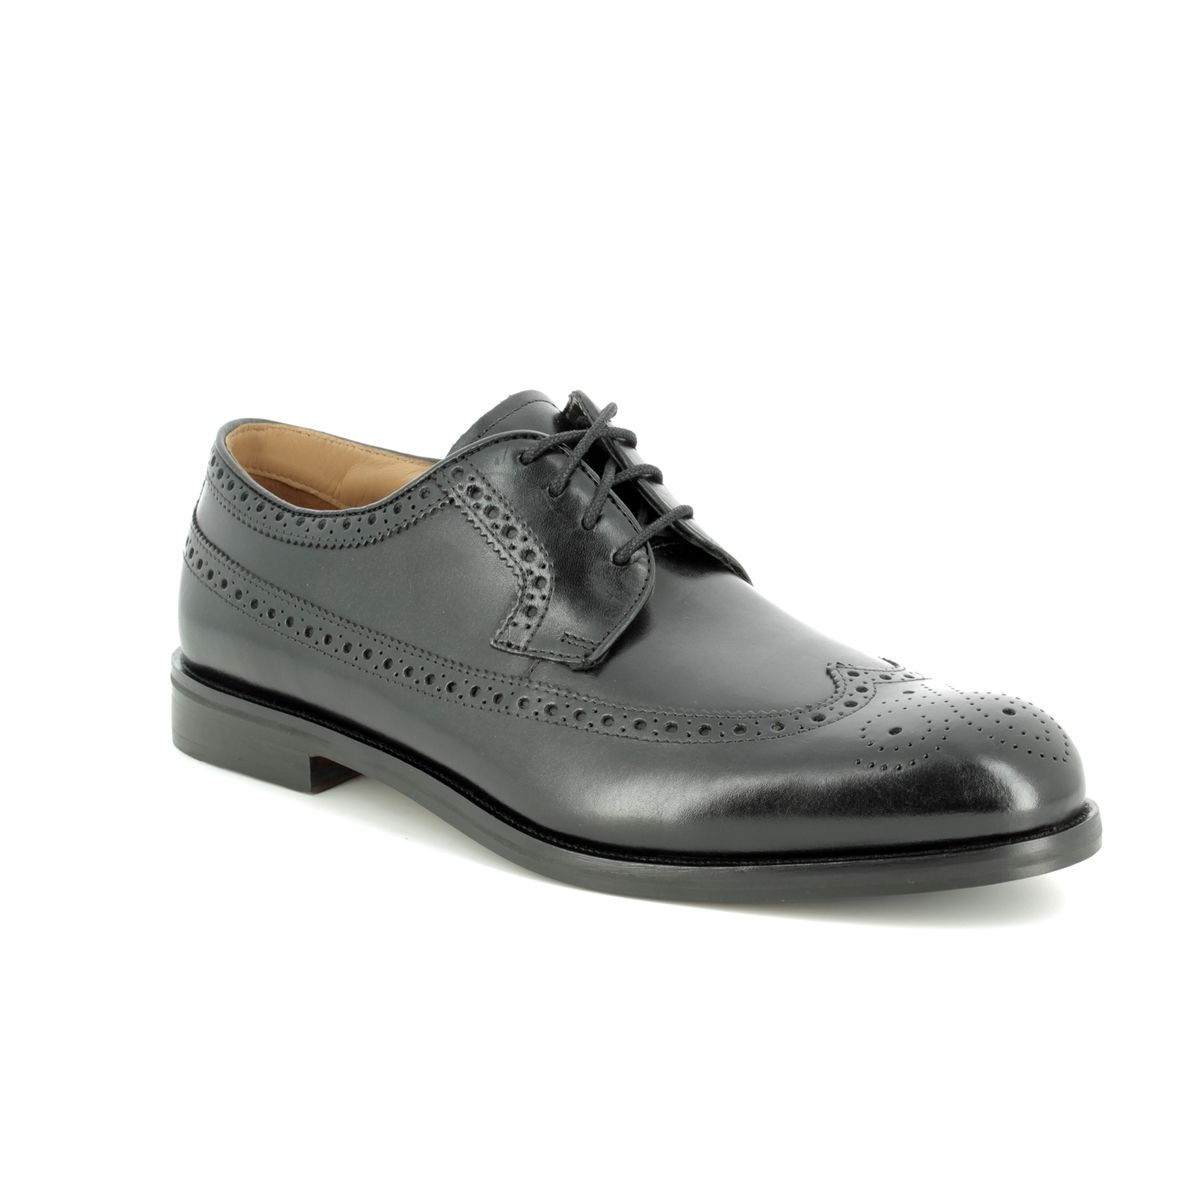 clarks black and white brogues